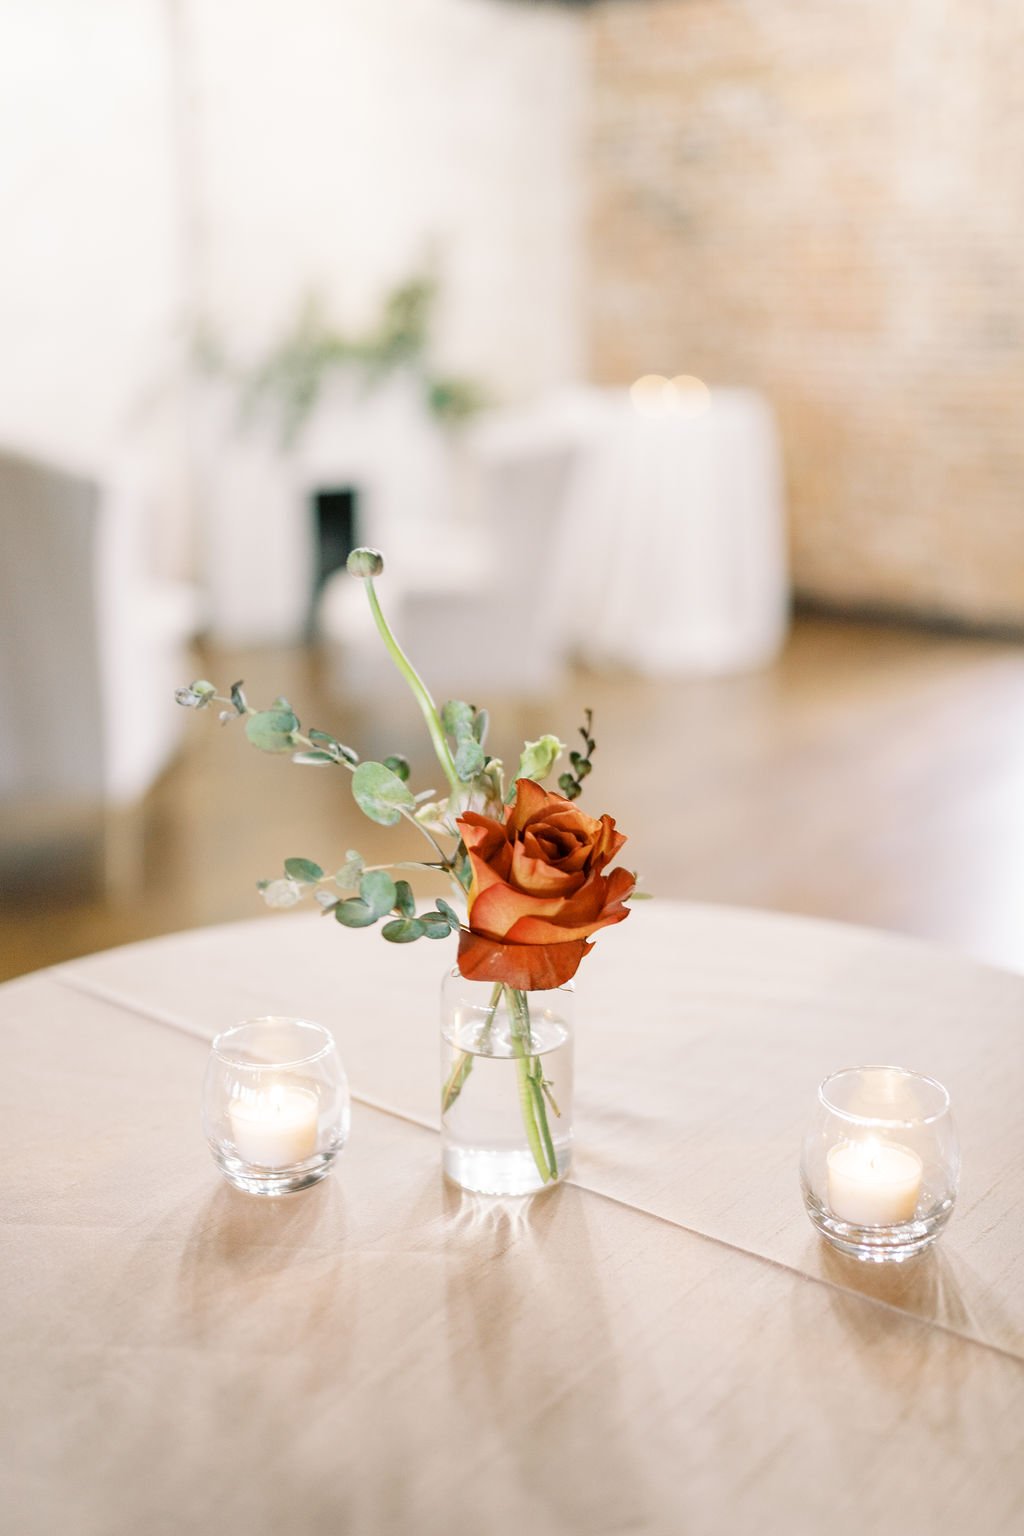 This romantic and organic wedding held at Clementine Hall was filled with fall textures in an autumnal color palette. Flowers included garden roses, dahlias, ranunculus and fall foliage. Floral Design by Rosemary and Finch in Nashville, TN.